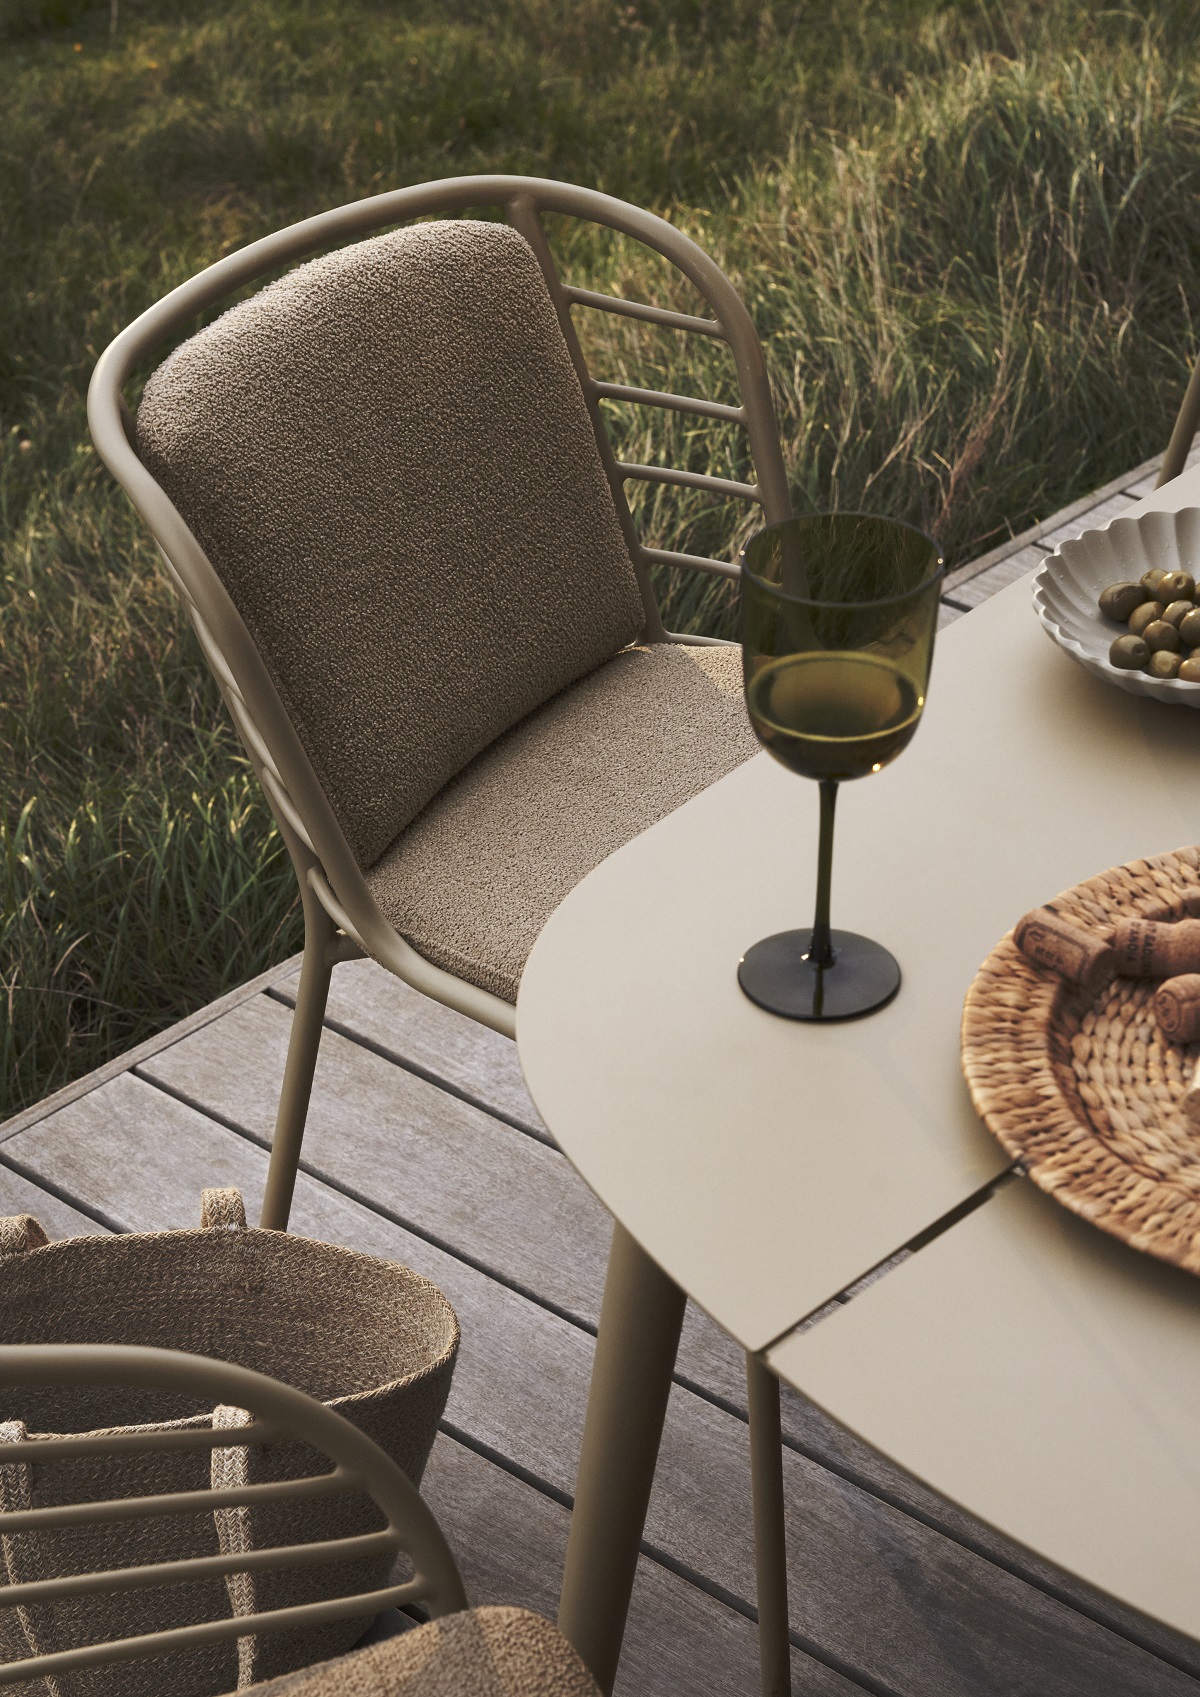 stone and brown tones in outdoor furniture range from BoConcept